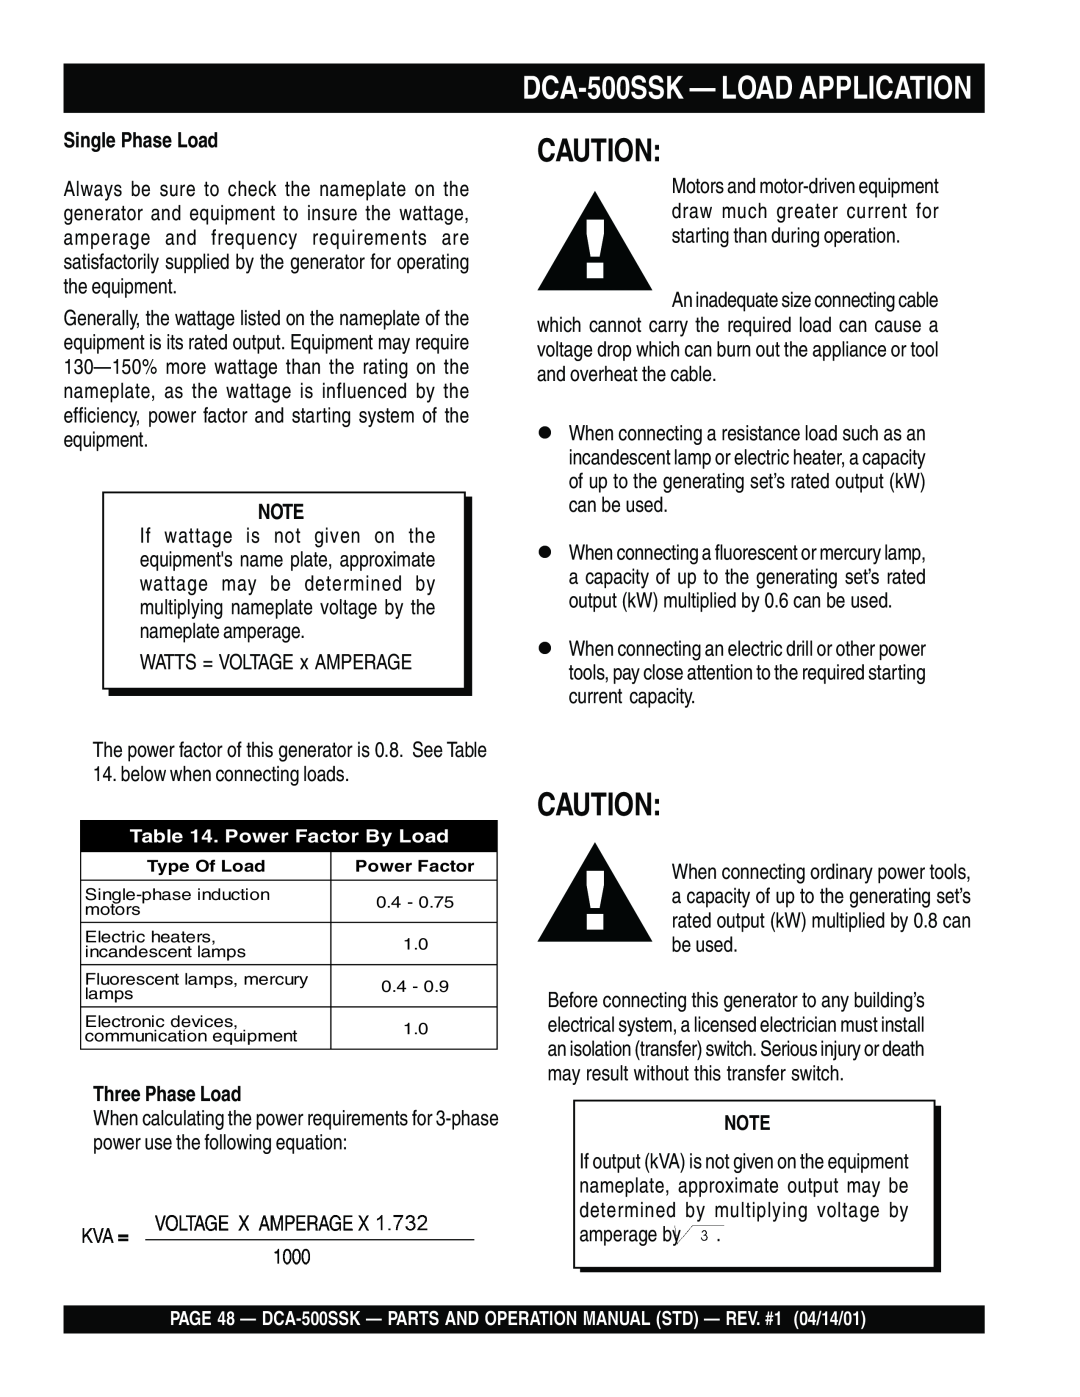 Multiquip operation manual DCA-500SSK - LOAD APPLICATION, Single Phase Load, Three Phase Load 